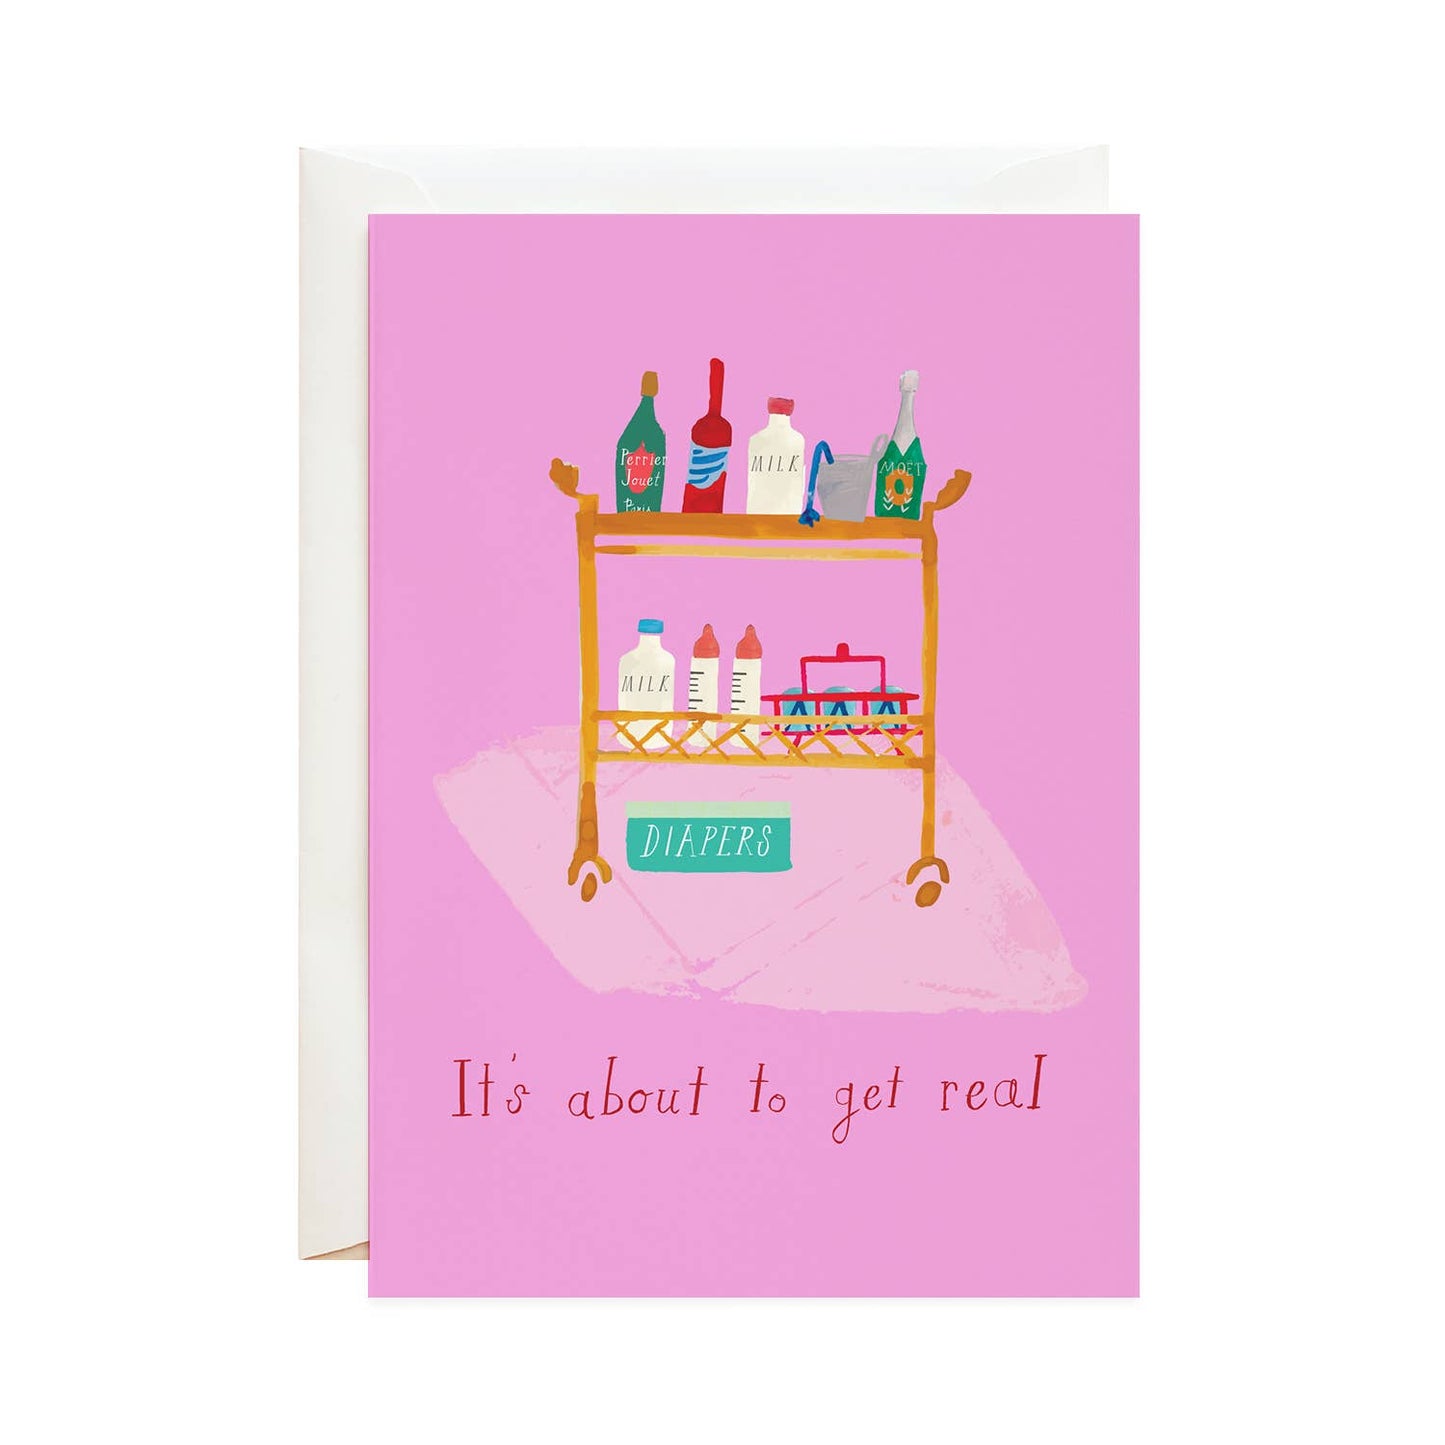 Baby-newborn-greeting card -- picture of bar cart with baby milk and supplies mixed in with alcohol bottles. At the bottom it reads "It's about to get real" 